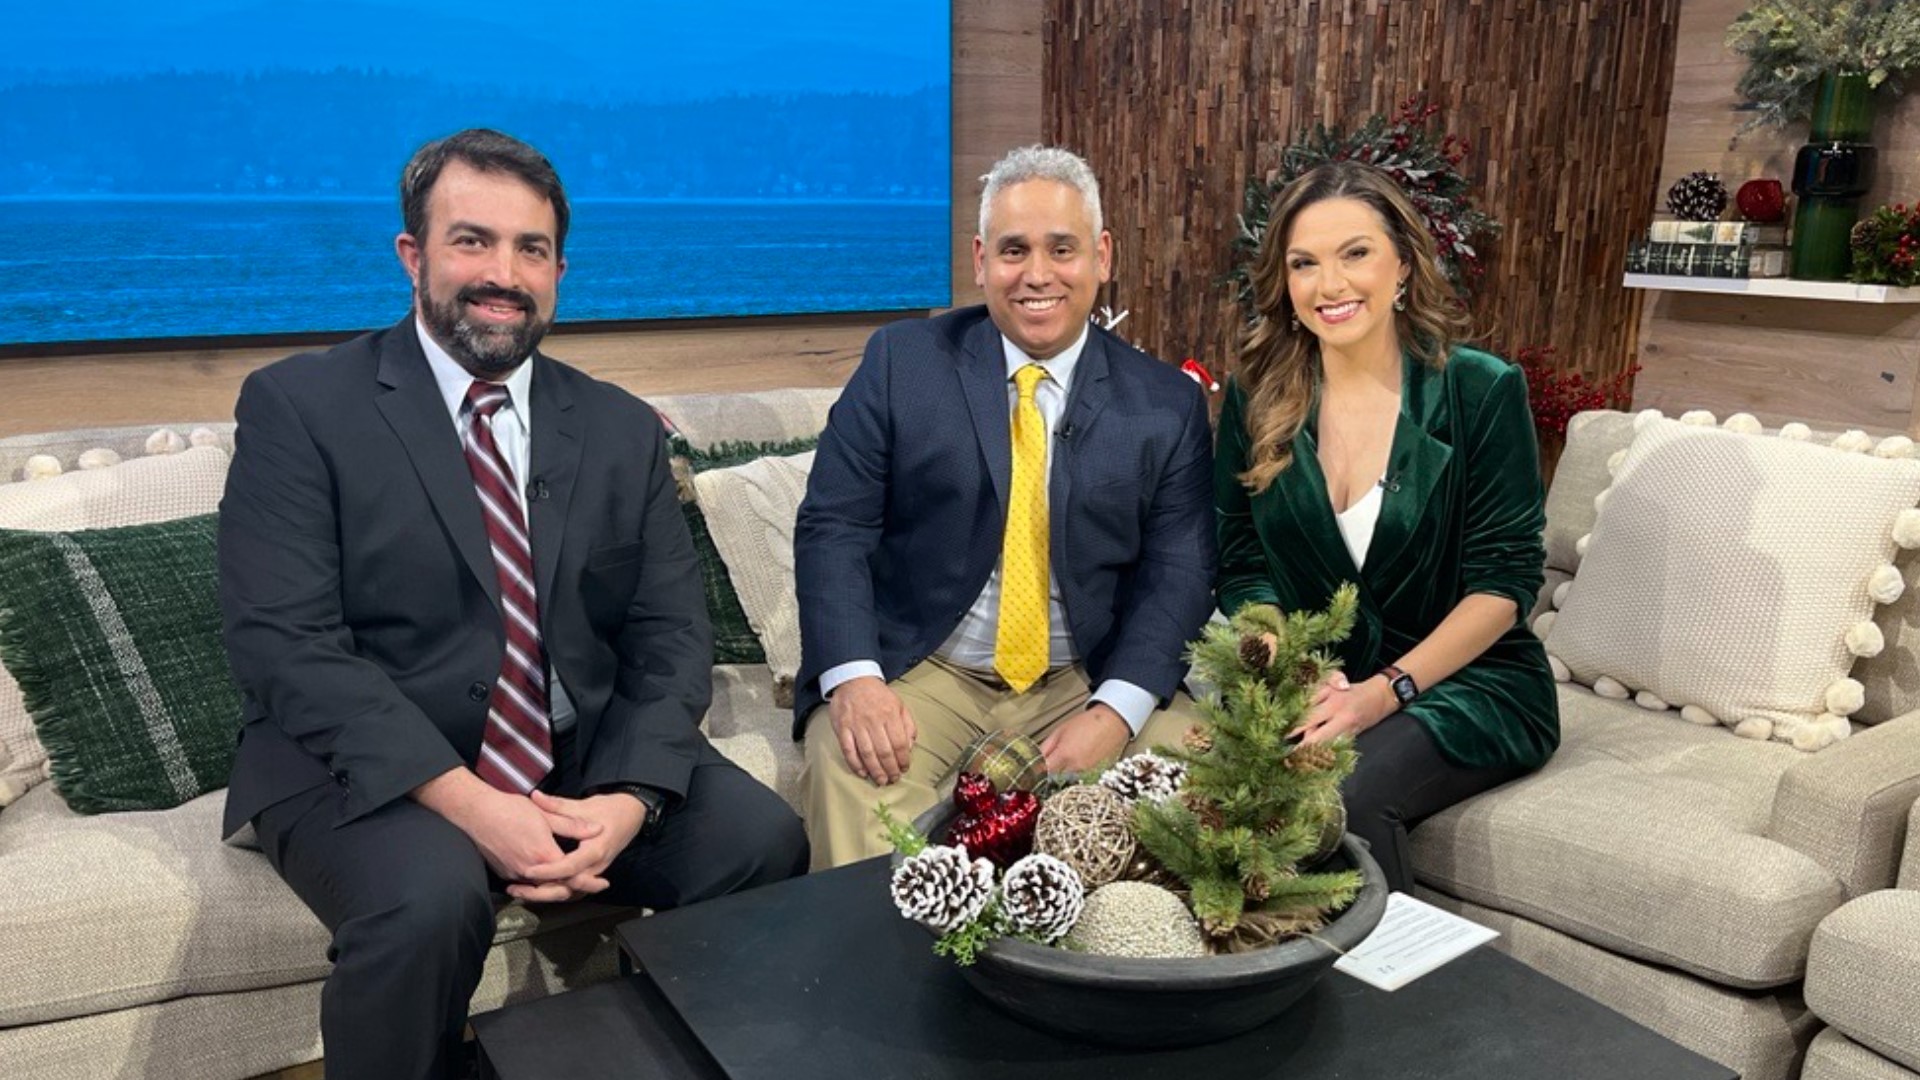 Dr. Daniel Cuadrado and Dr. TJ Templin stress the importance of lung cancer screenings for those at risk. Sponsored by Virginia Mason Franciscan Health.